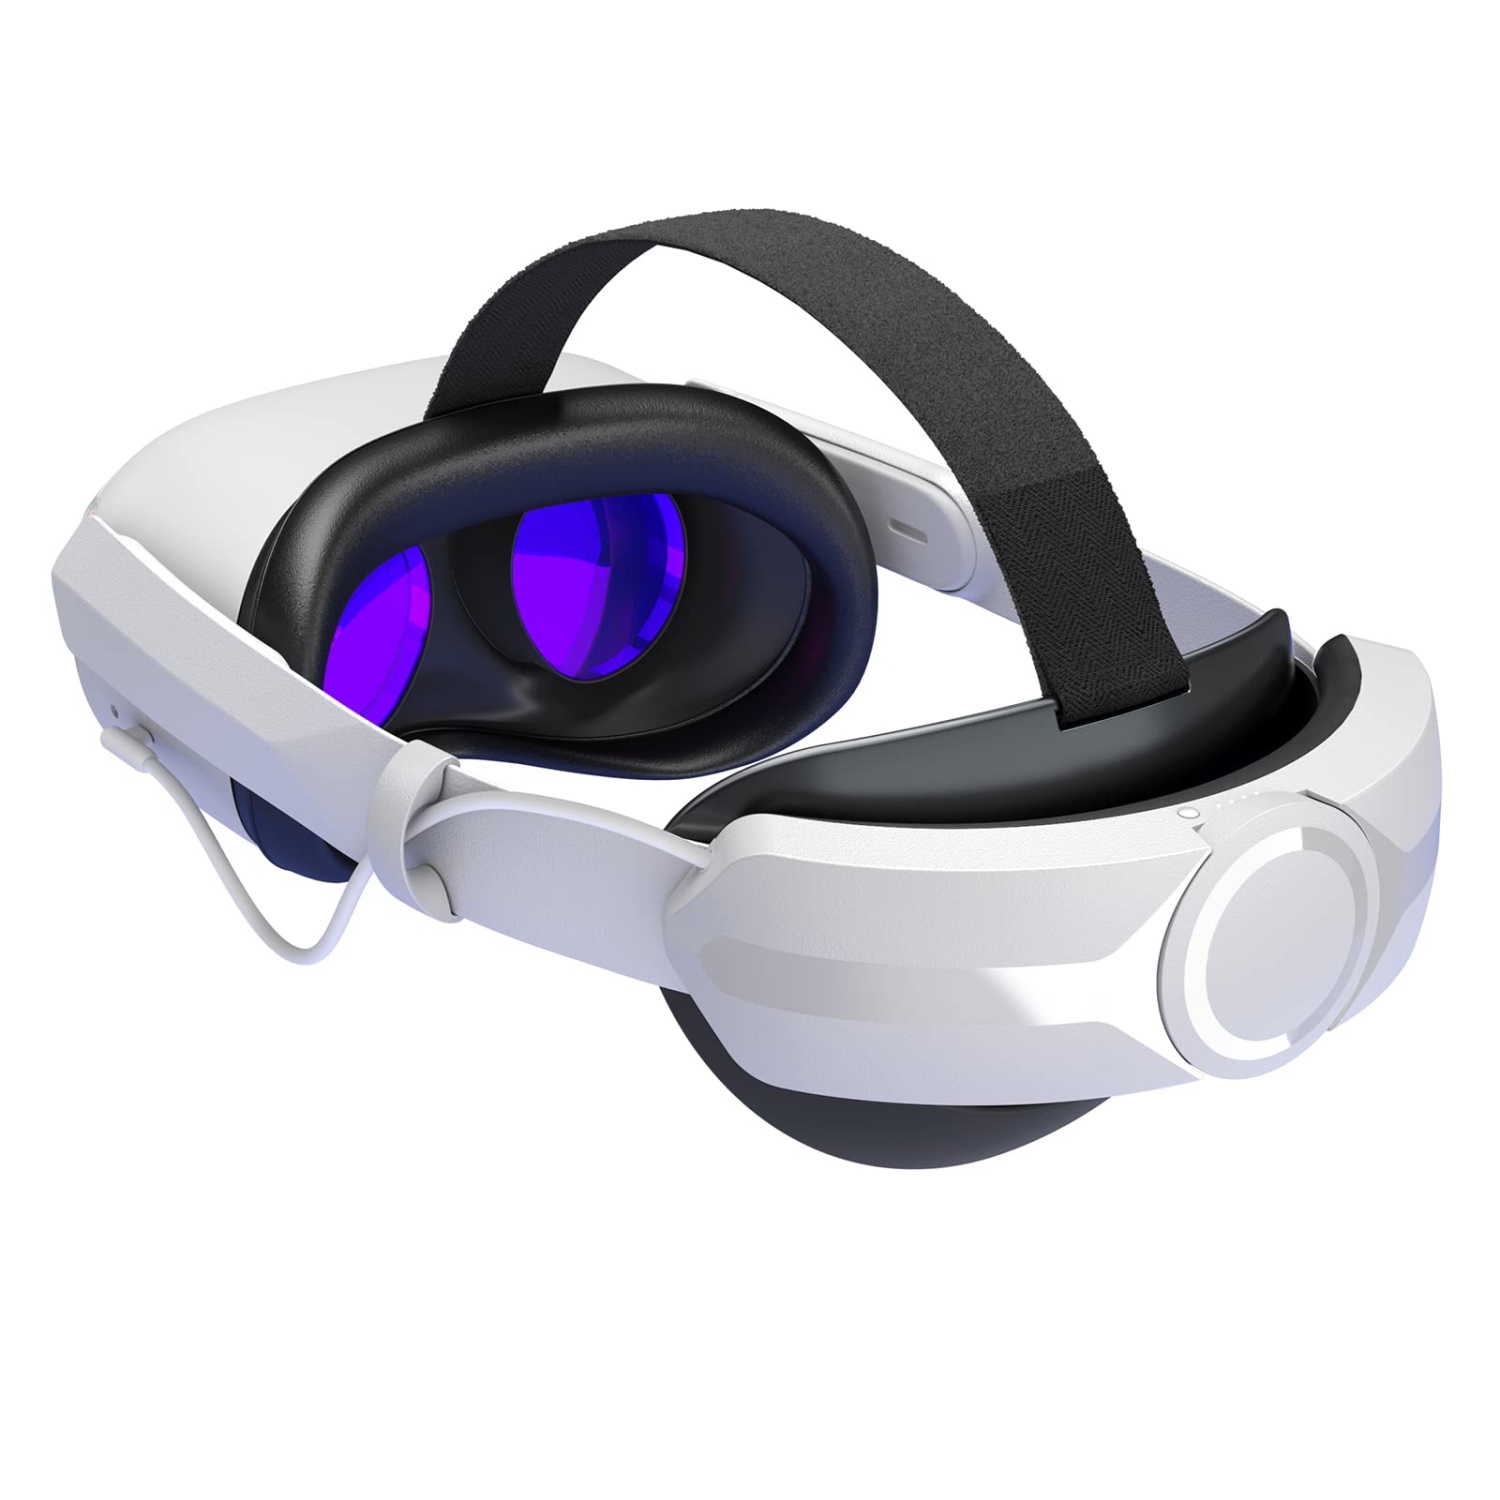 Head Strap with Battery for Meta/Oculus Quest 2, Extend Playtime & Counter Balance & Fast Charging, Adjustable Elite Strap